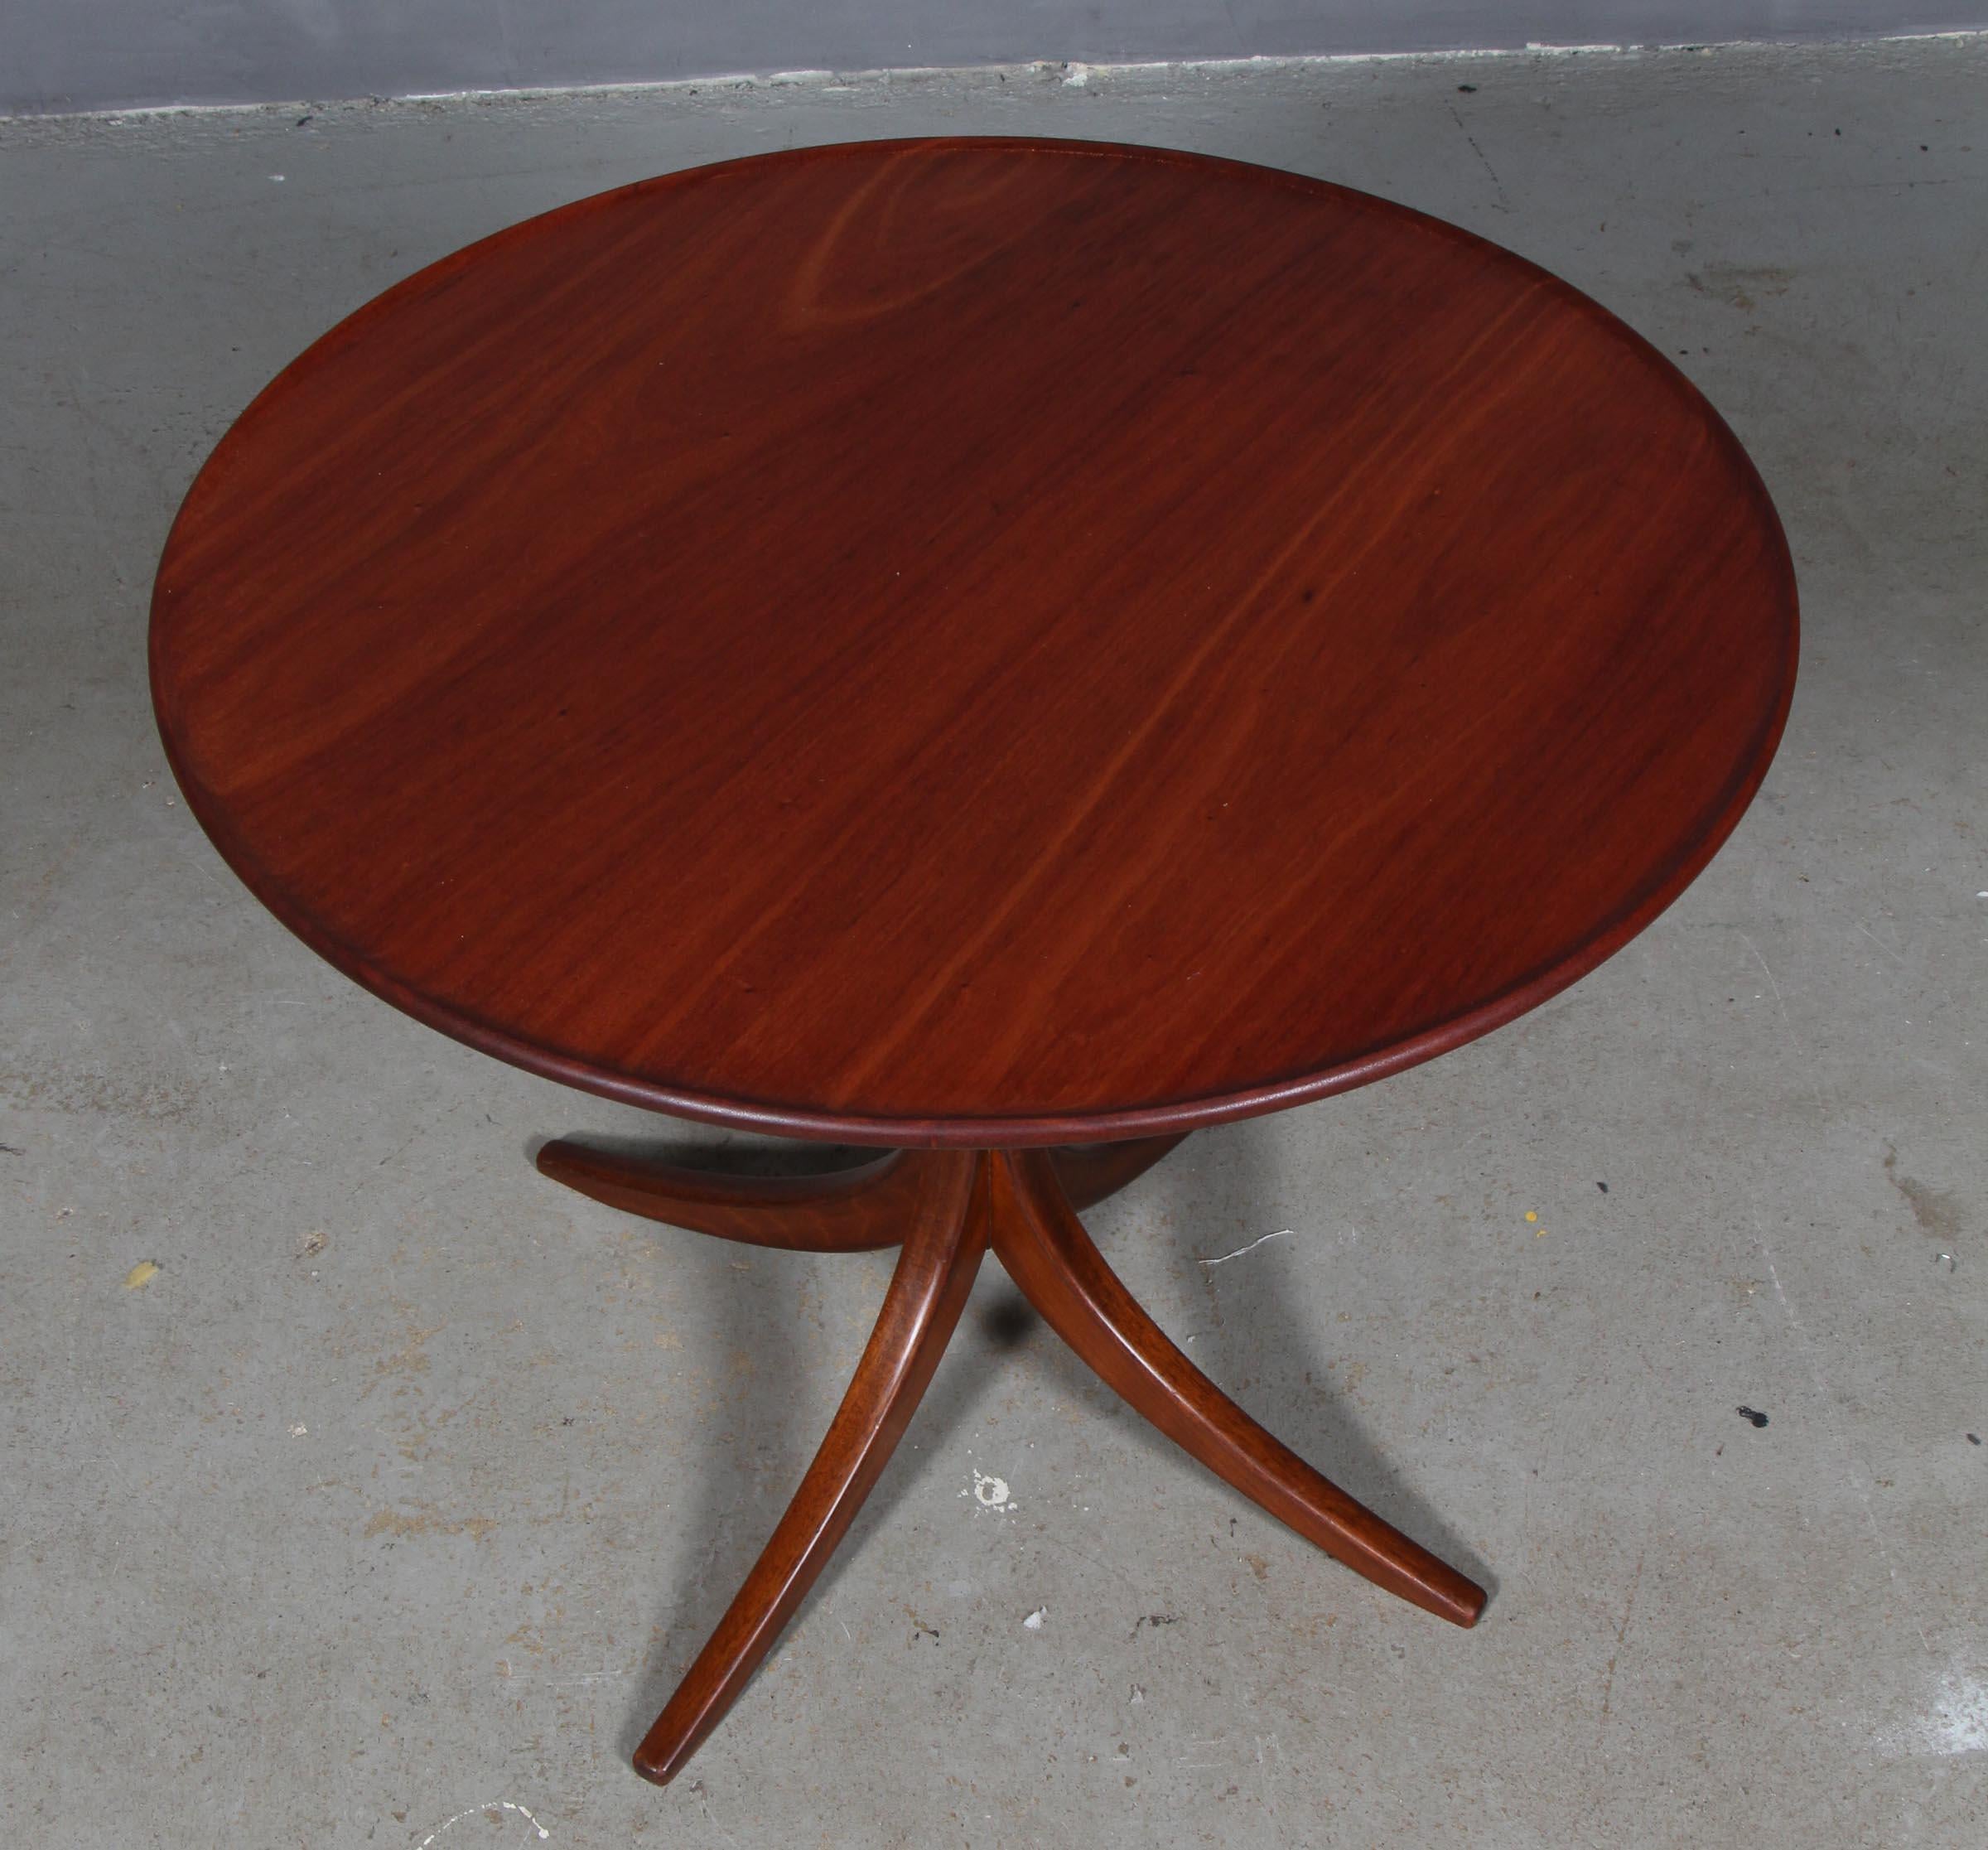 Frits Henningsen round table in Cuba Mahogany.

Designed in the 1930s, made by Frits Henningsen.
 